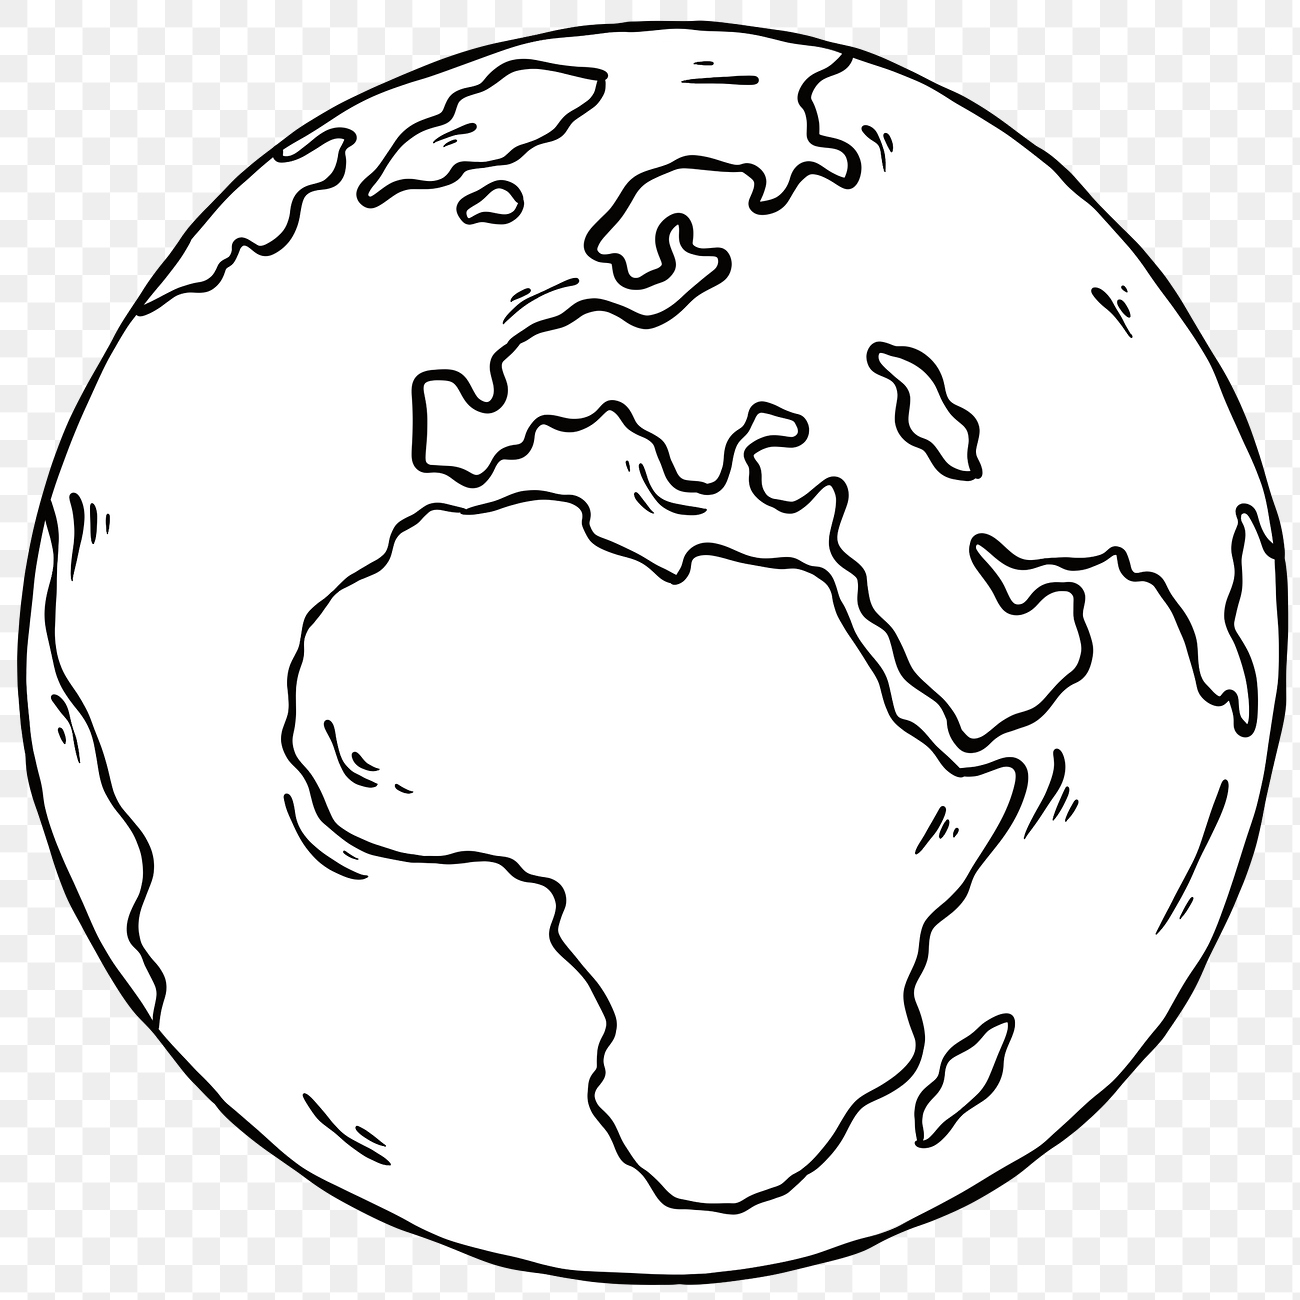 Hand Drawn Planet Earth Png Sticker Free Stock Illustration High